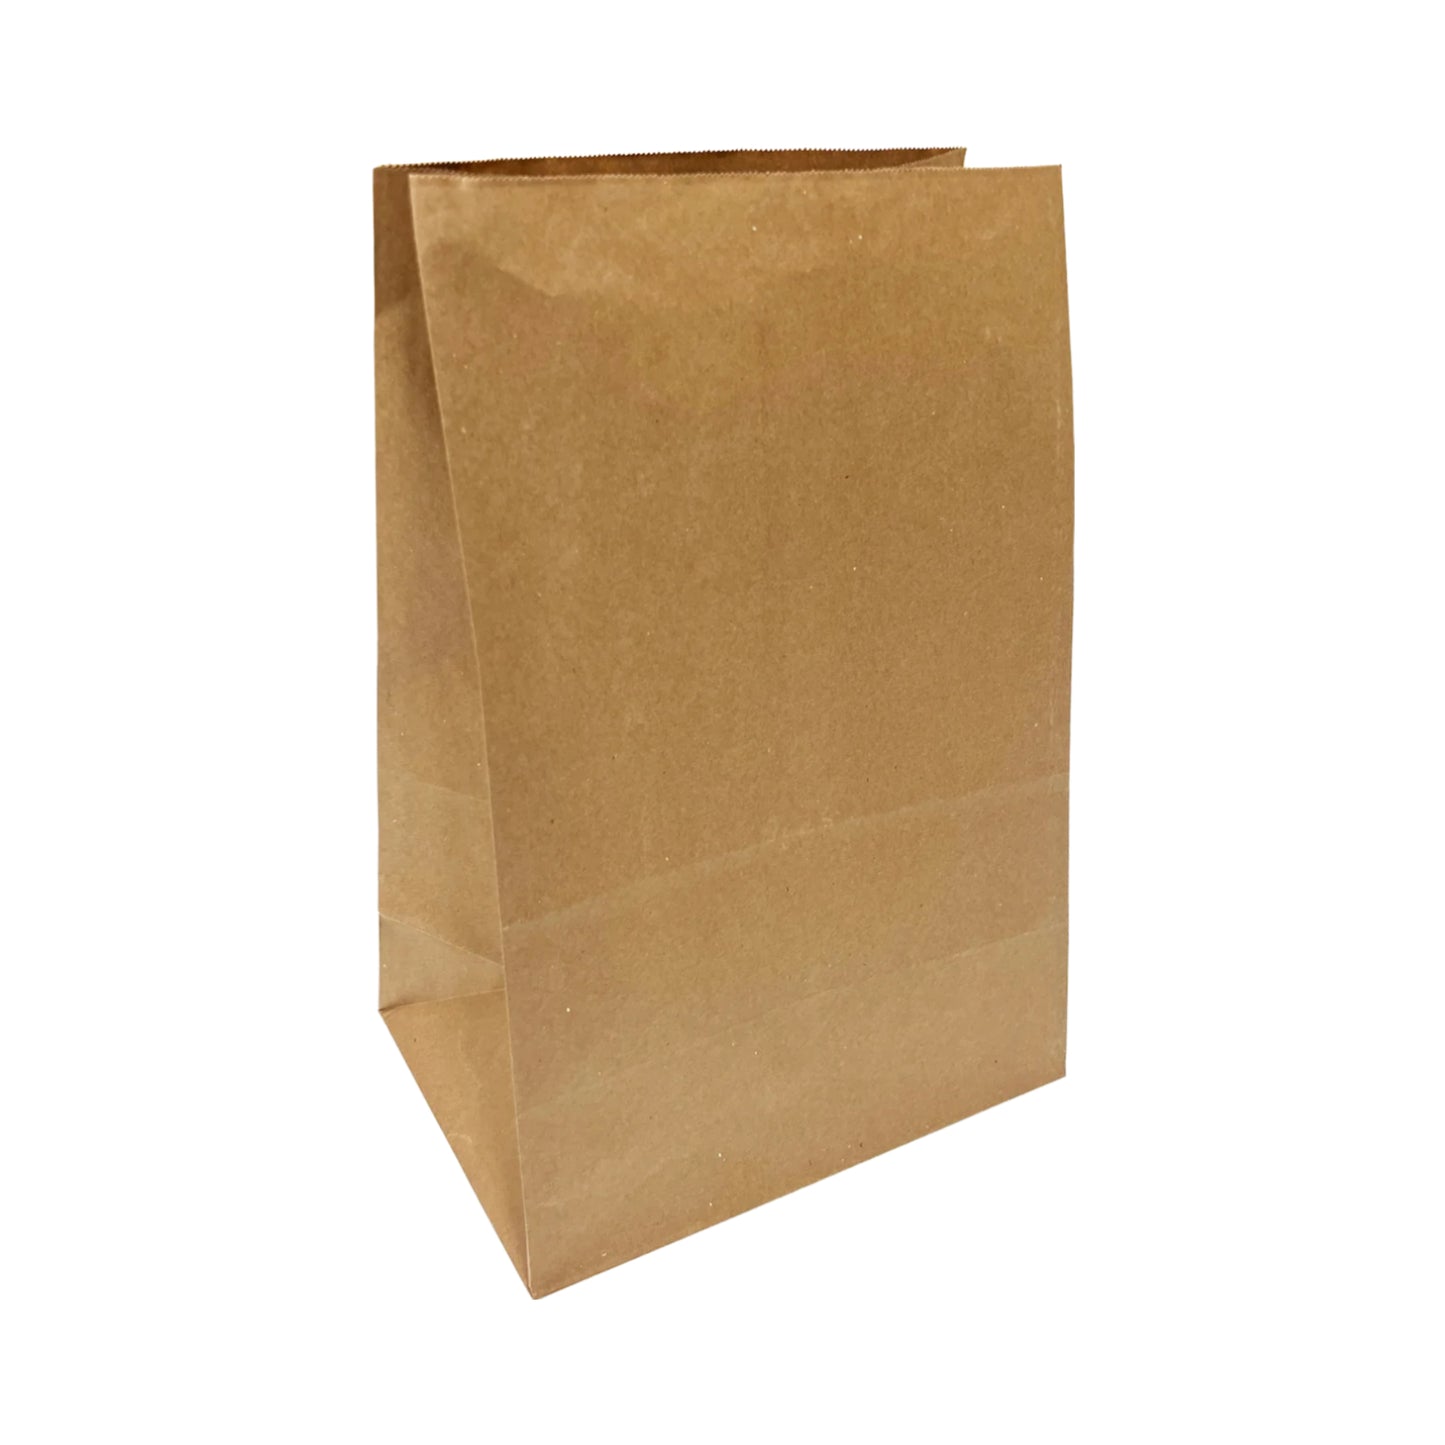 500pcs #6 Grocery Bags 6x3.75x10.75 inches; $0.04/pc